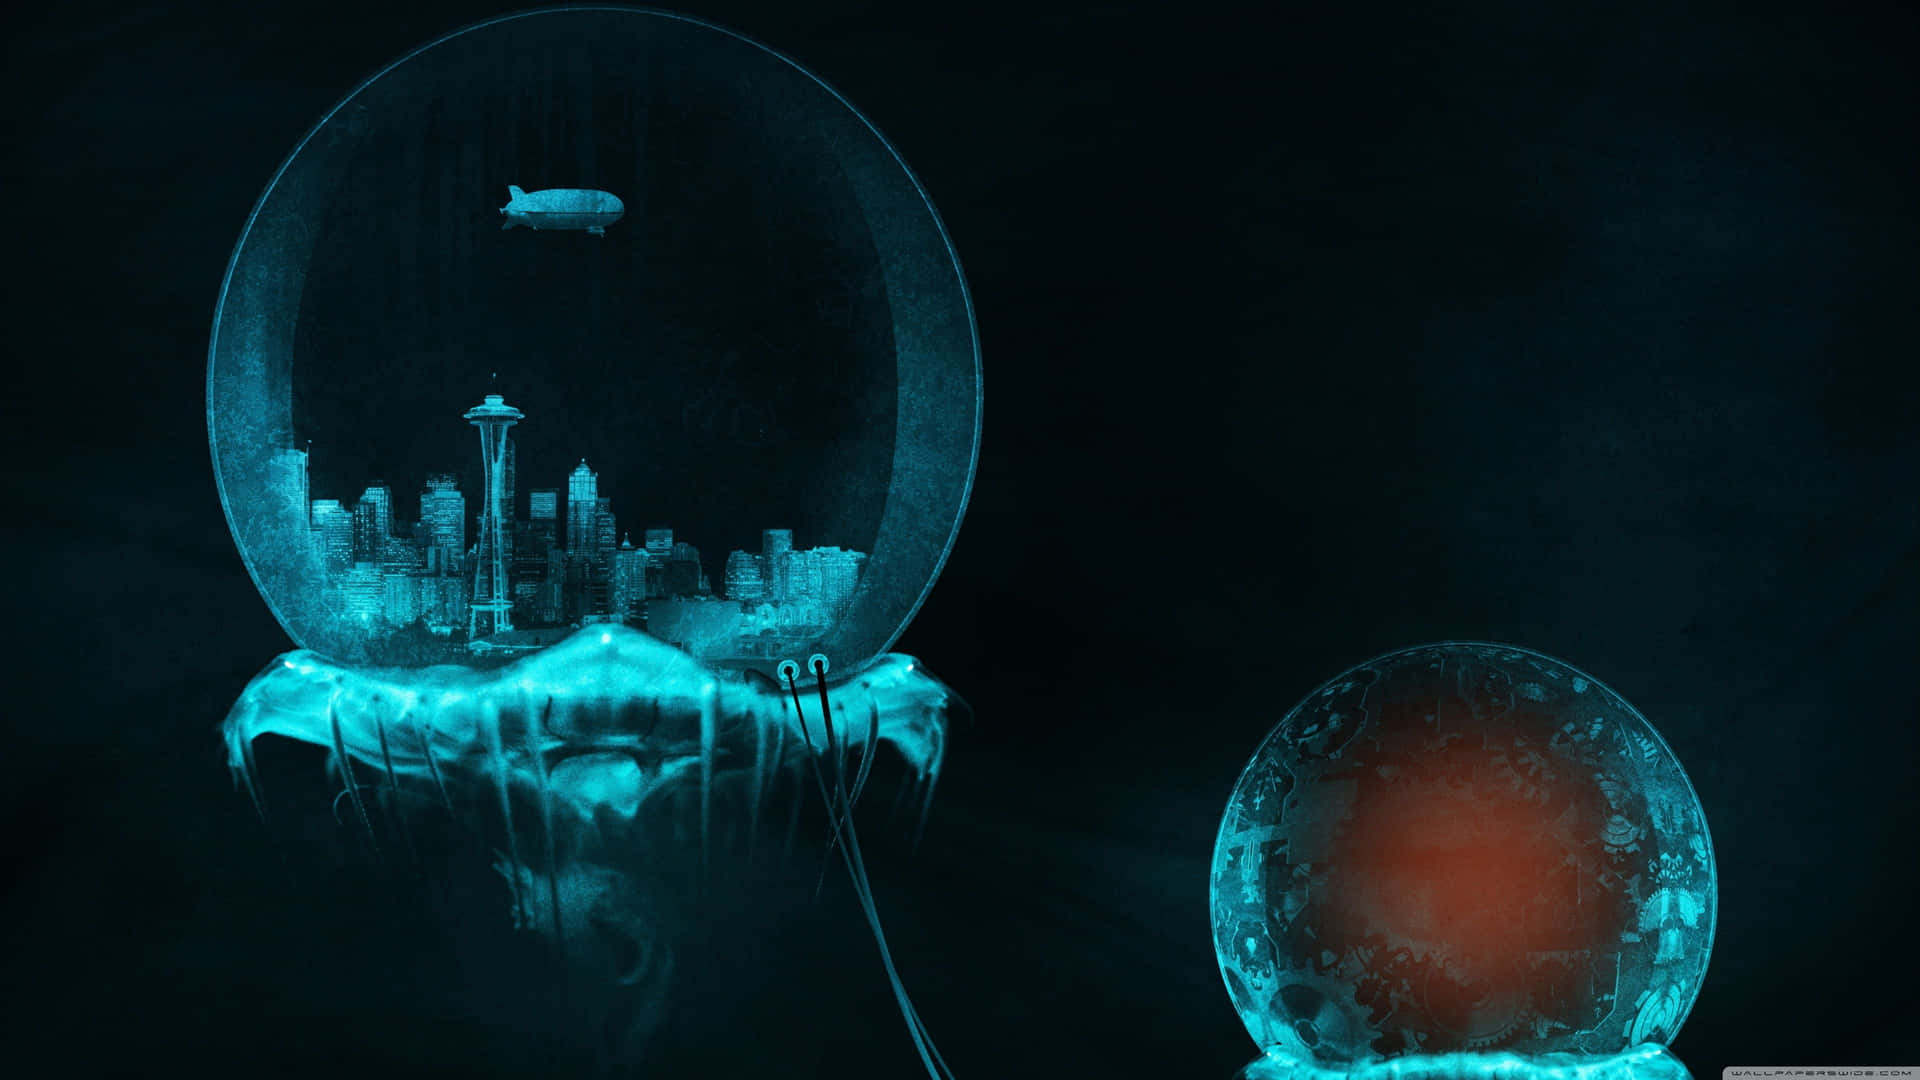 A Jellyfish In A Blue Glass With A City In The Background Wallpaper